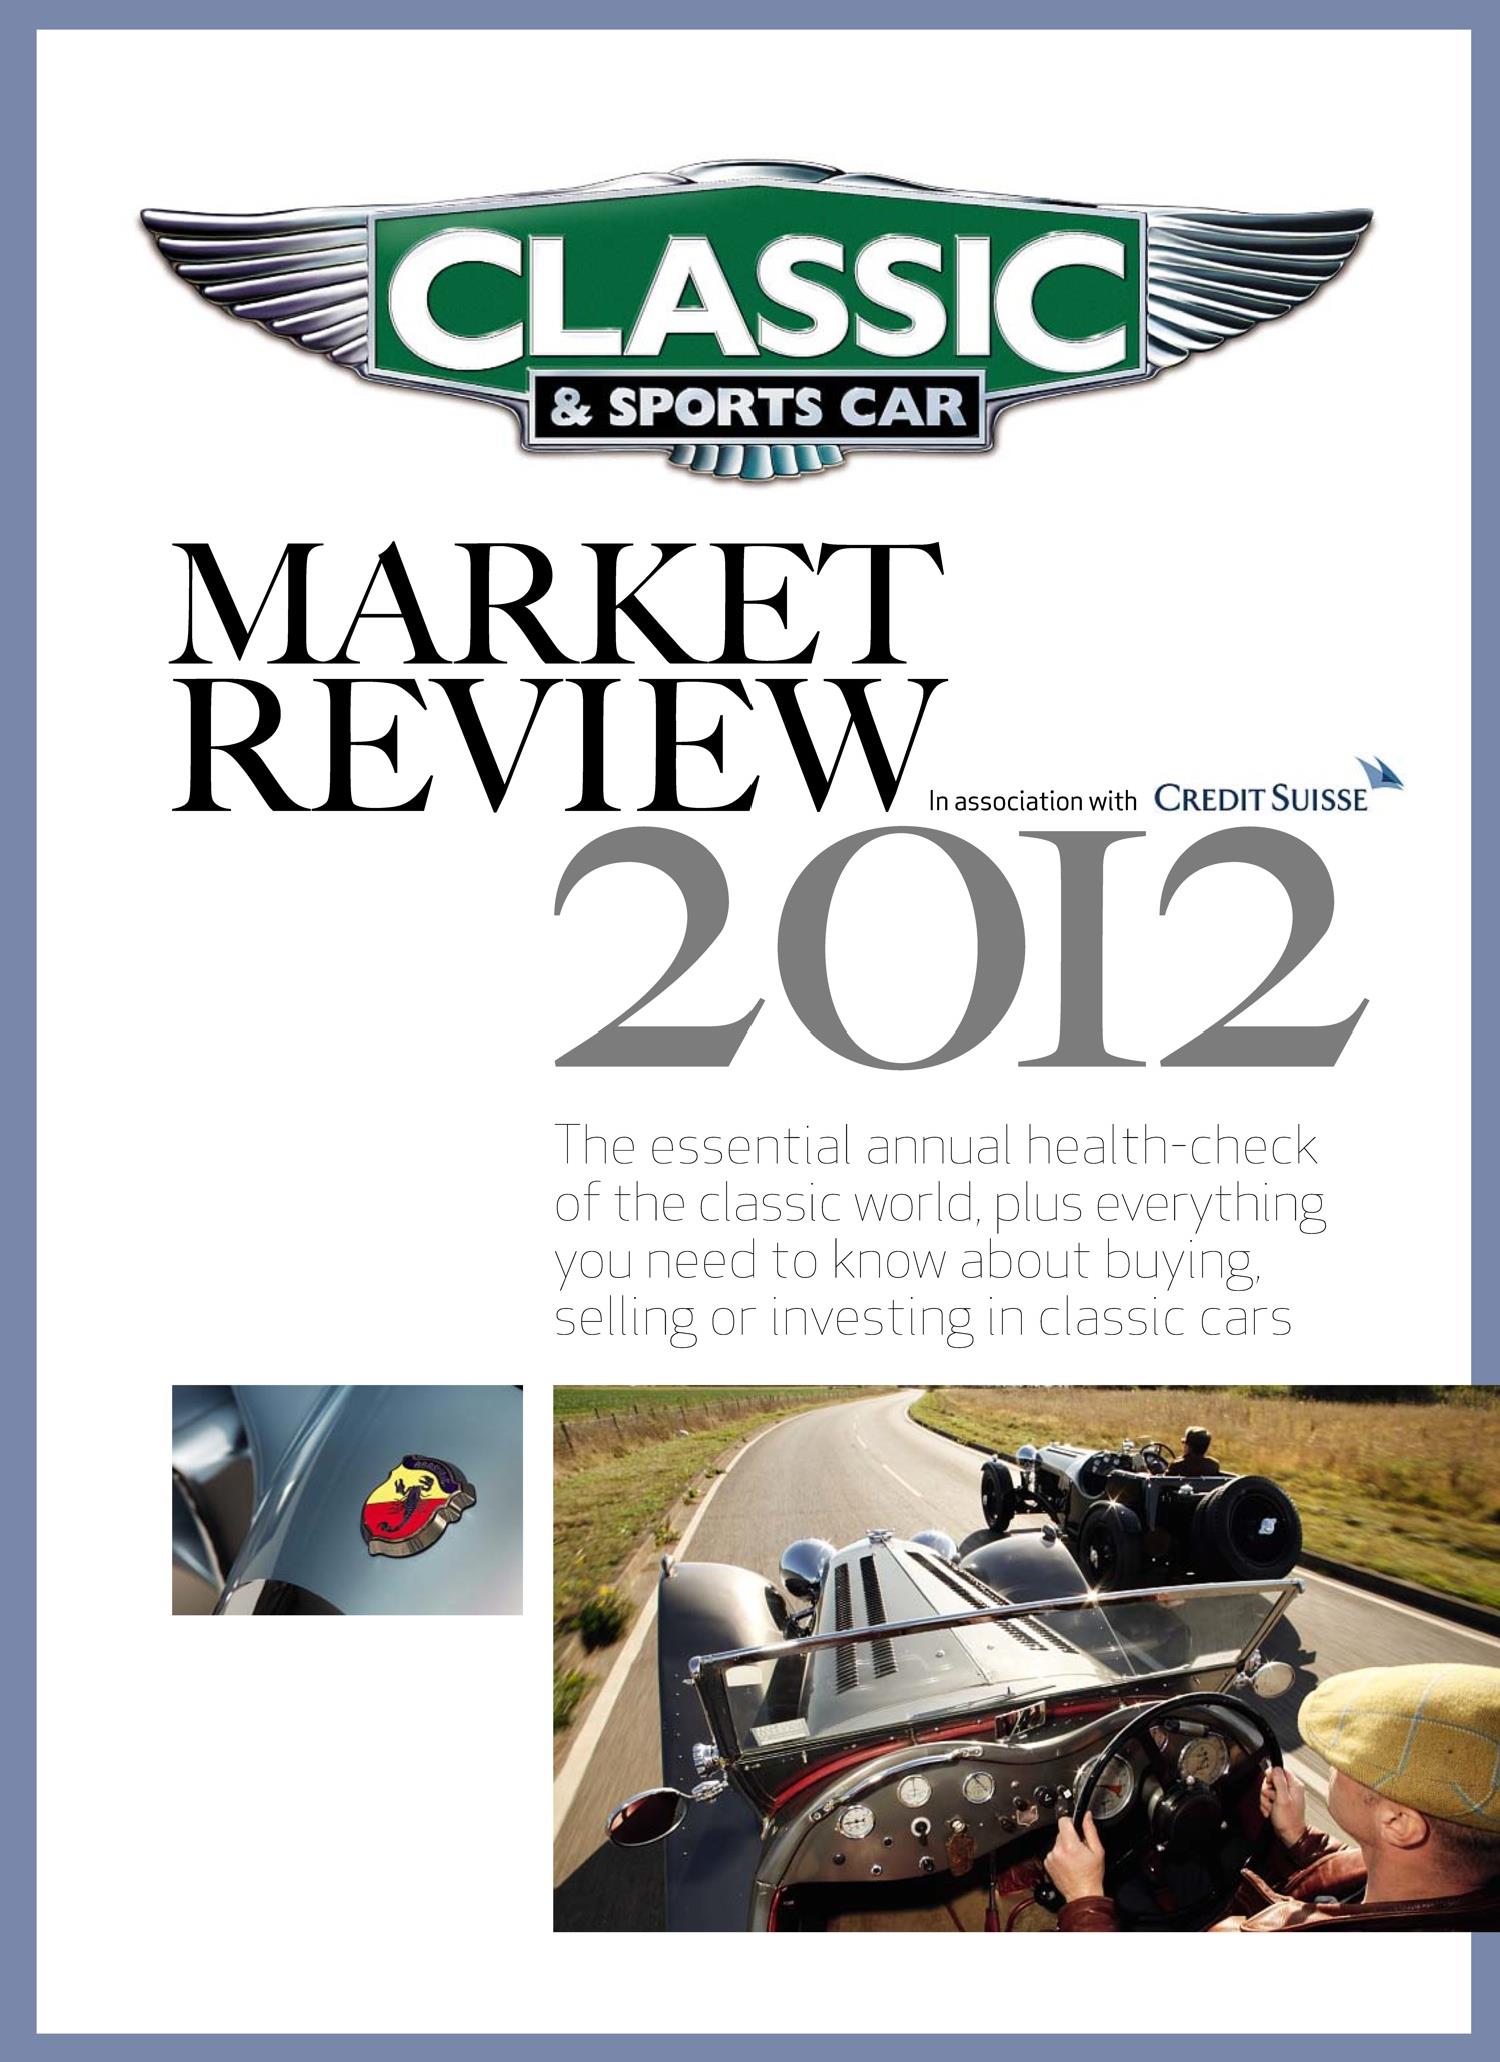 Журнал Market review 2012(from the publishers of Classic Sports cars)